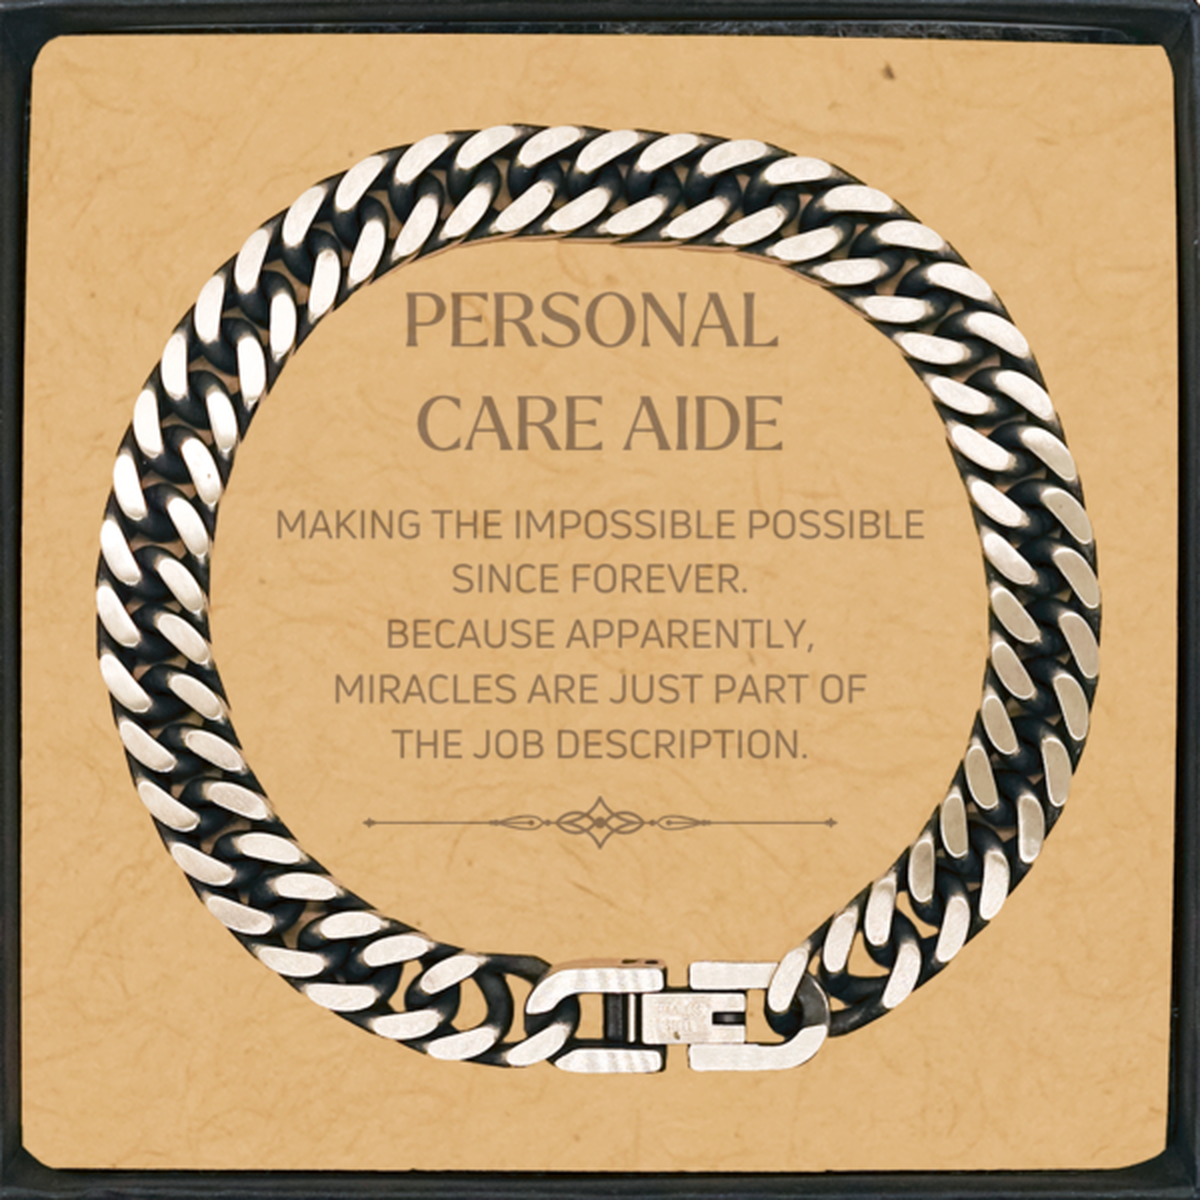 Funny Personal Care Aide Gifts, Miracles are just part of the job description, Inspirational Birthday Cuban Link Chain Bracelet For Personal Care Aide, Men, Women, Coworkers, Friends, Boss